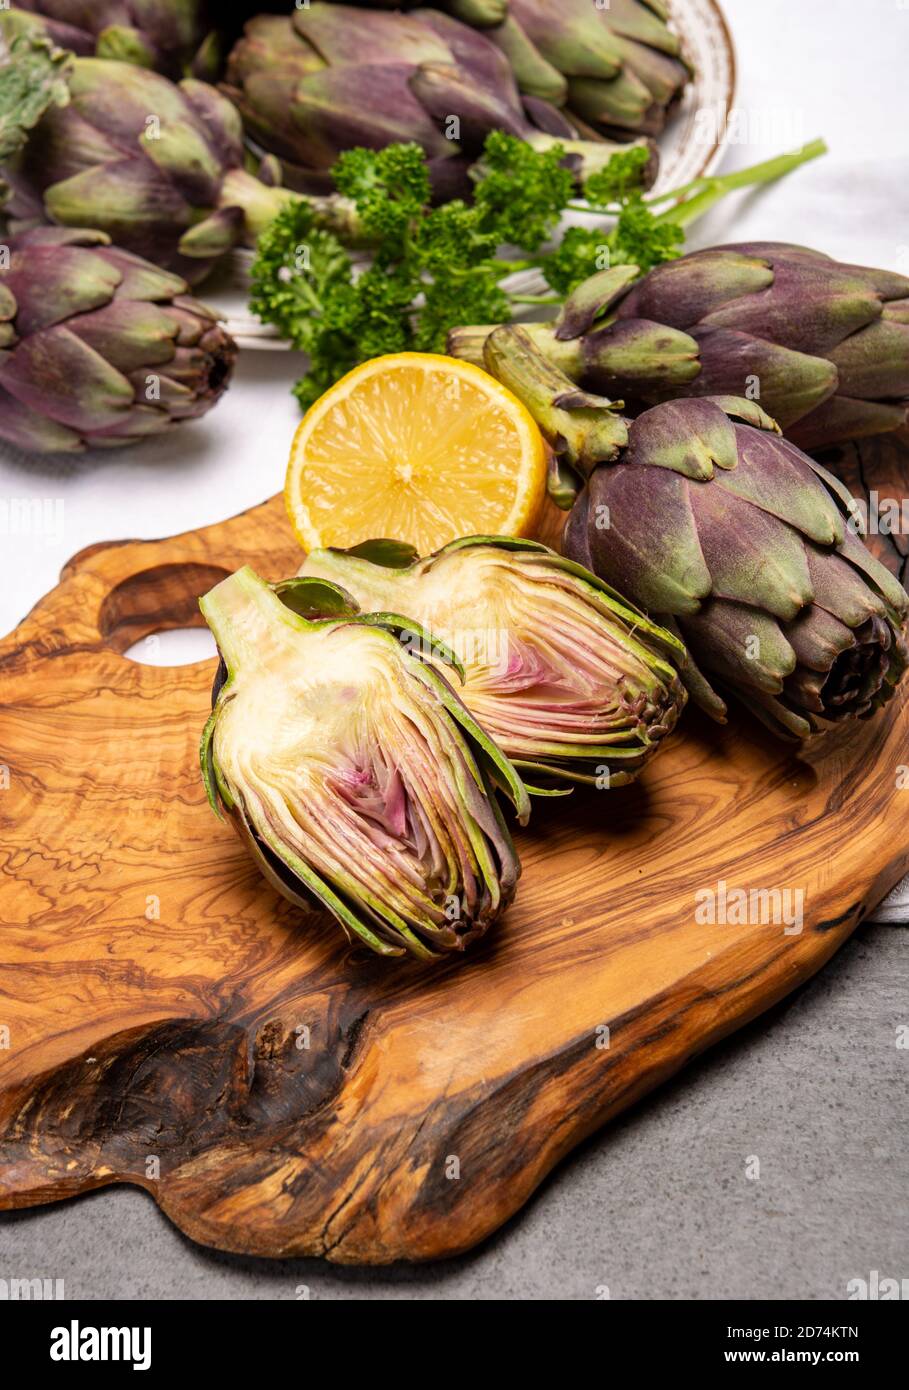 Fresh french petit violet artichokes heads cultivted in Brittany, France with lemon and parsley close up Stock Photo